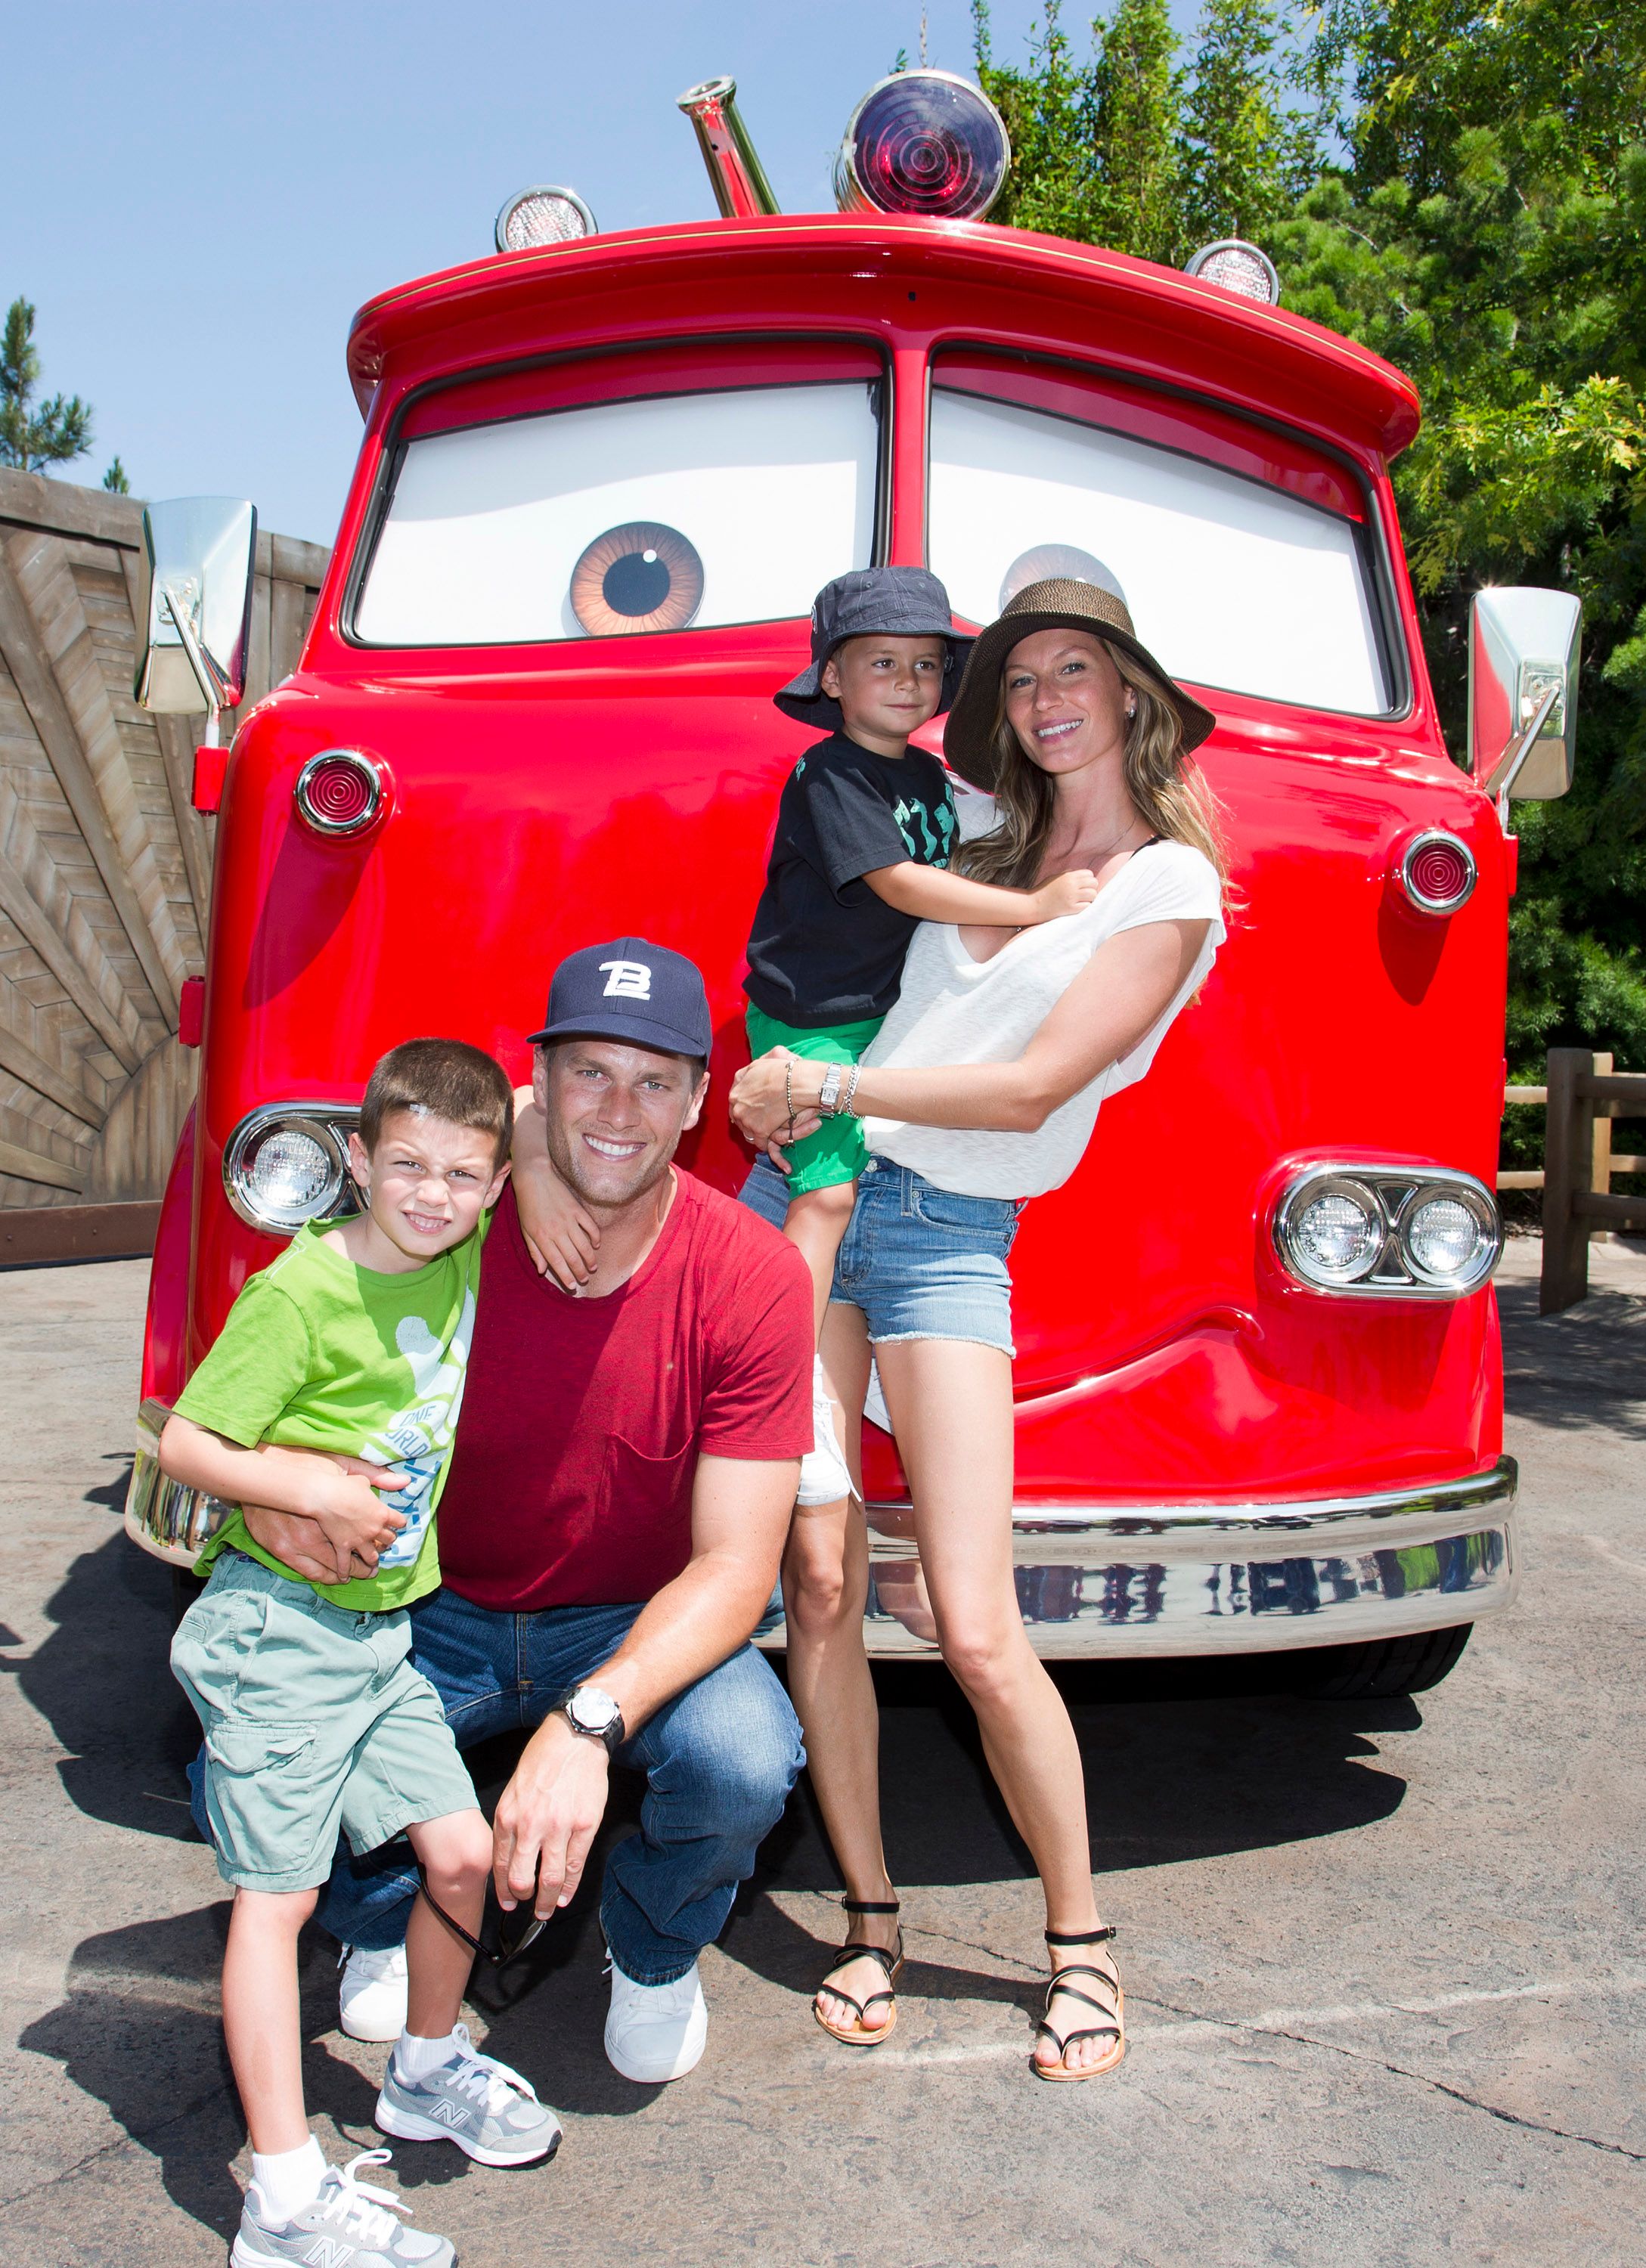 Tom Brady and Gisele Bundchen, with their sons Benjamin, and Jack at Disney California Adventure park in 2013 in Anaheim, California | Source: Getty Images